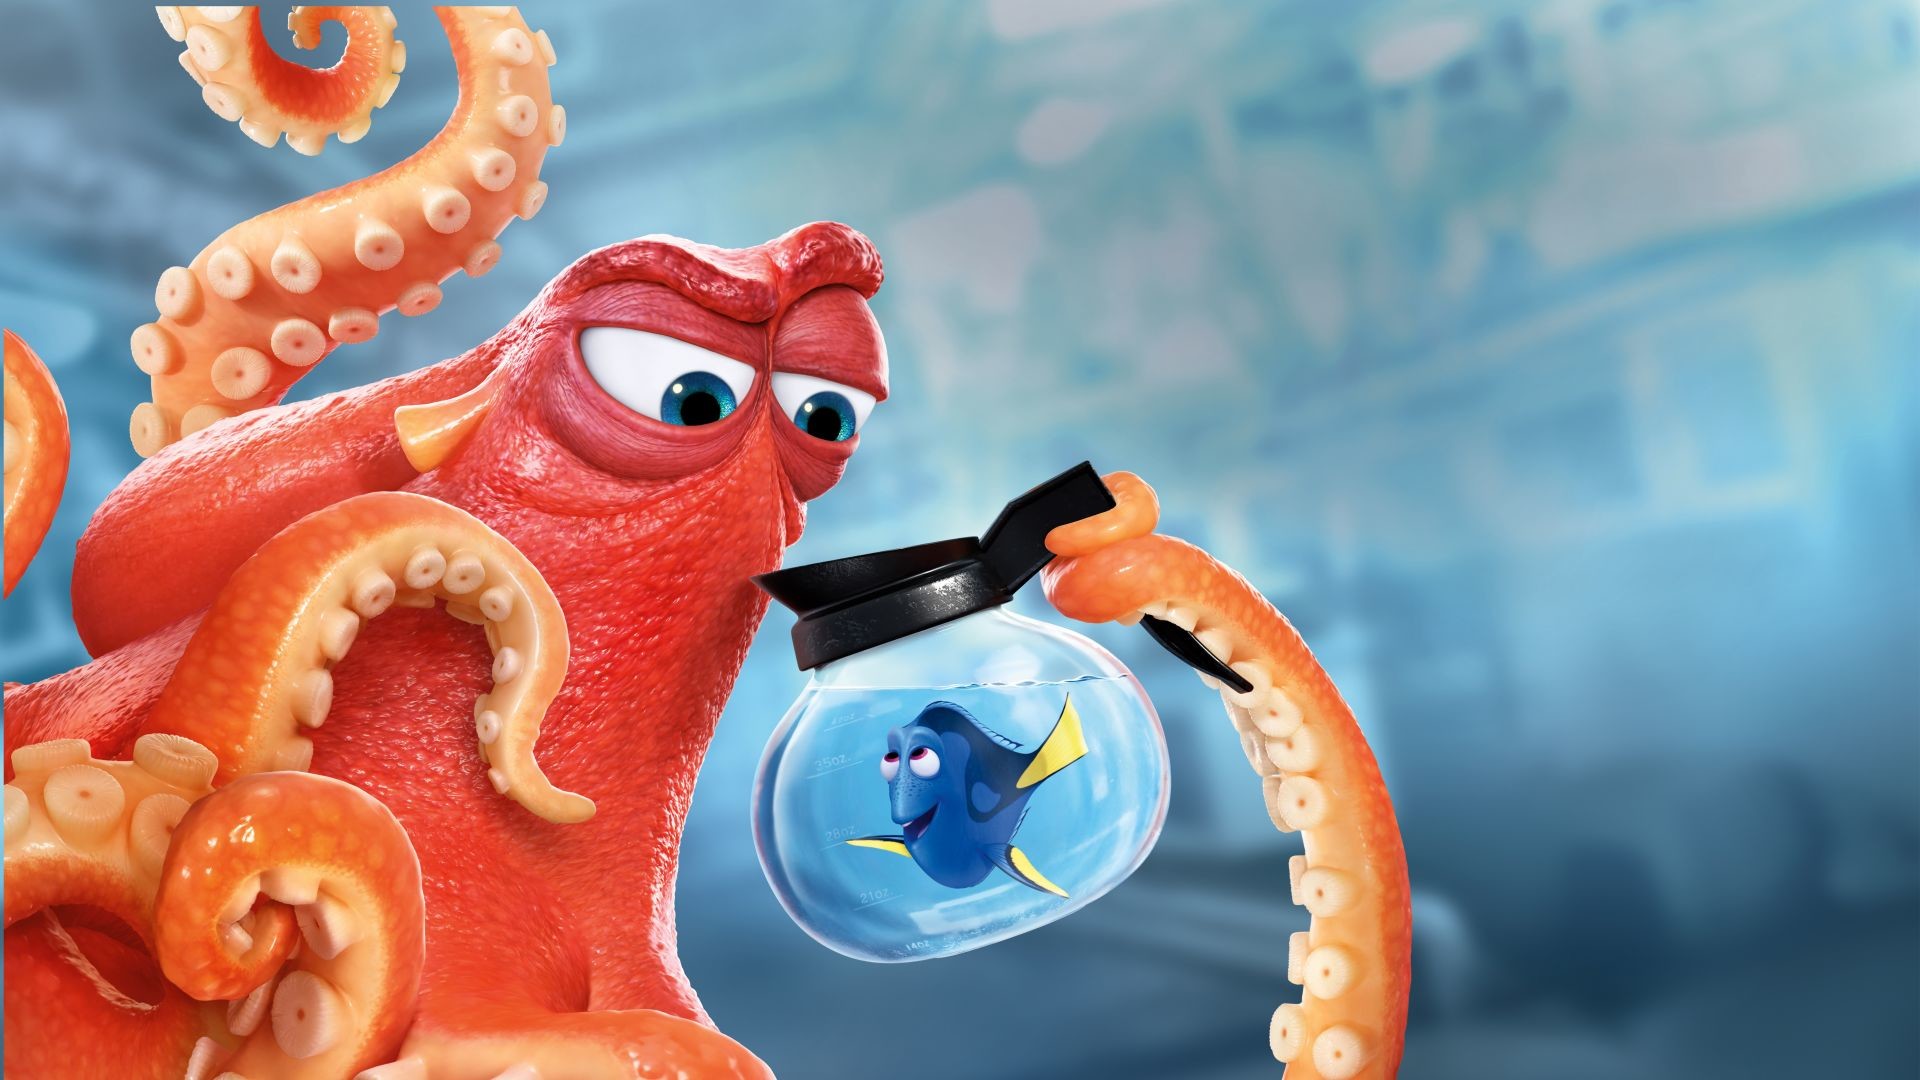 1920x1080 Finding Dory Wallpaper, Movies / Animation: Finding Dory, Hank, Nemo